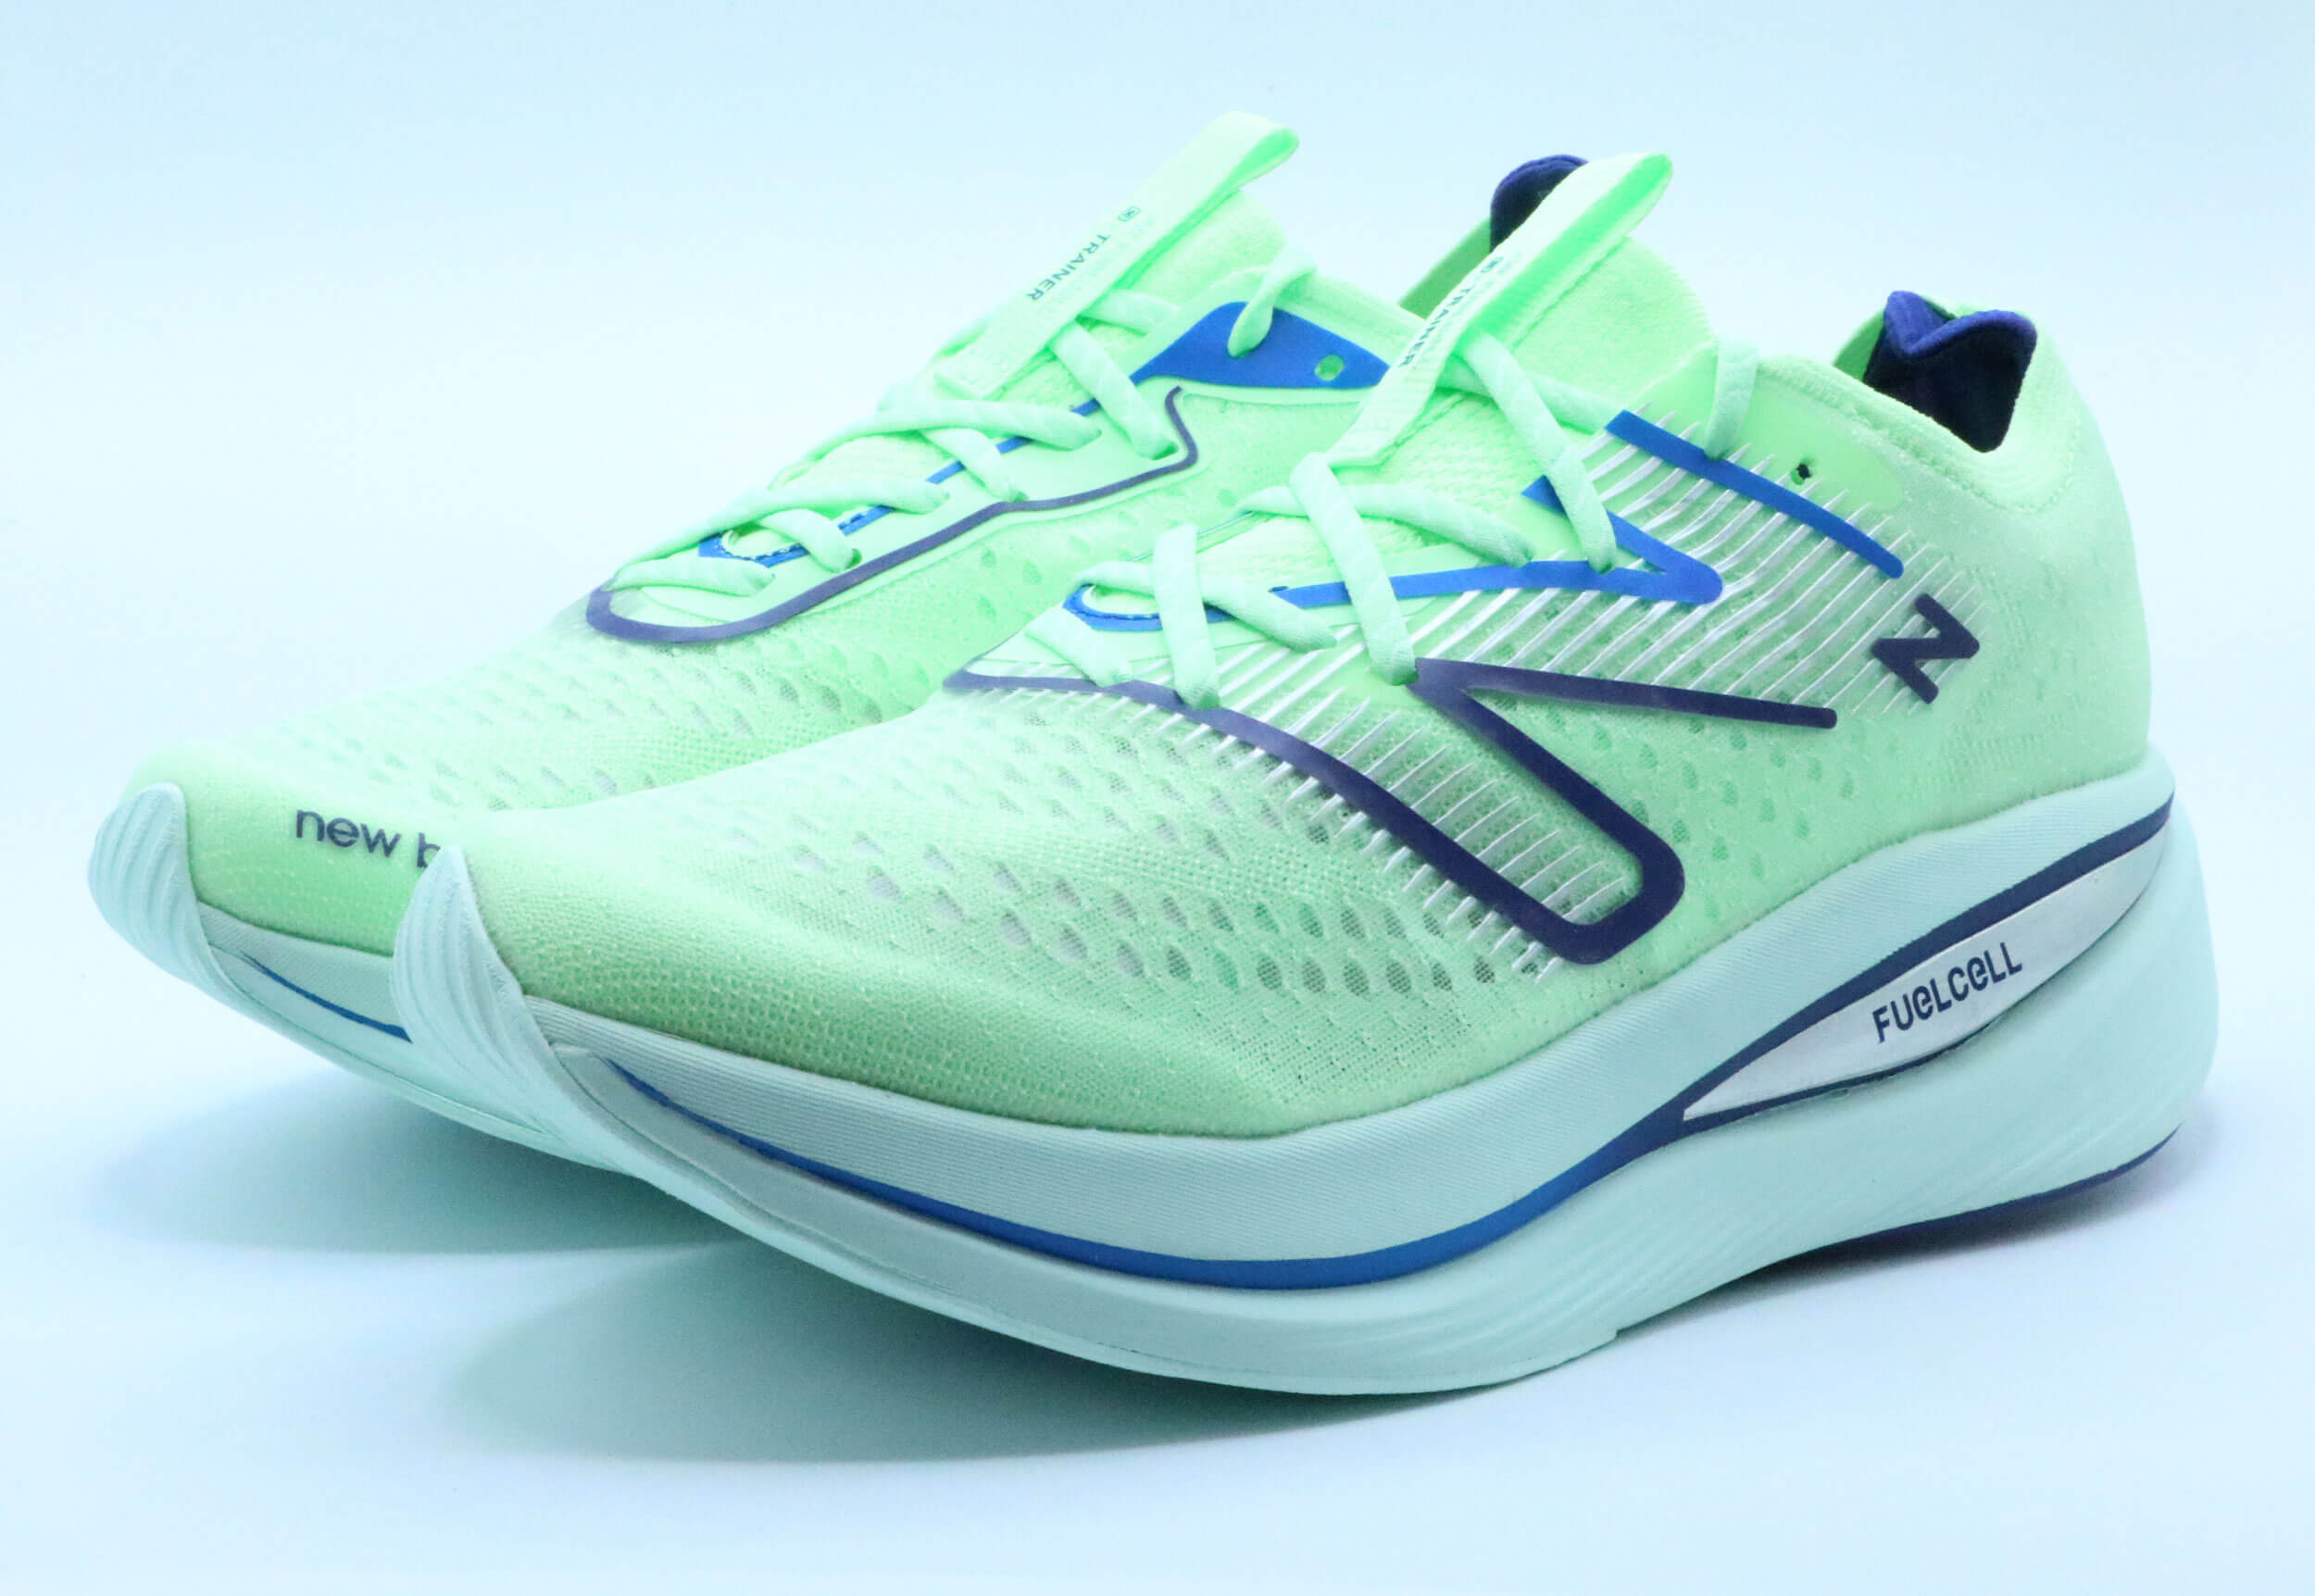 Can You Wear New Balance Running Shoes for Walking?